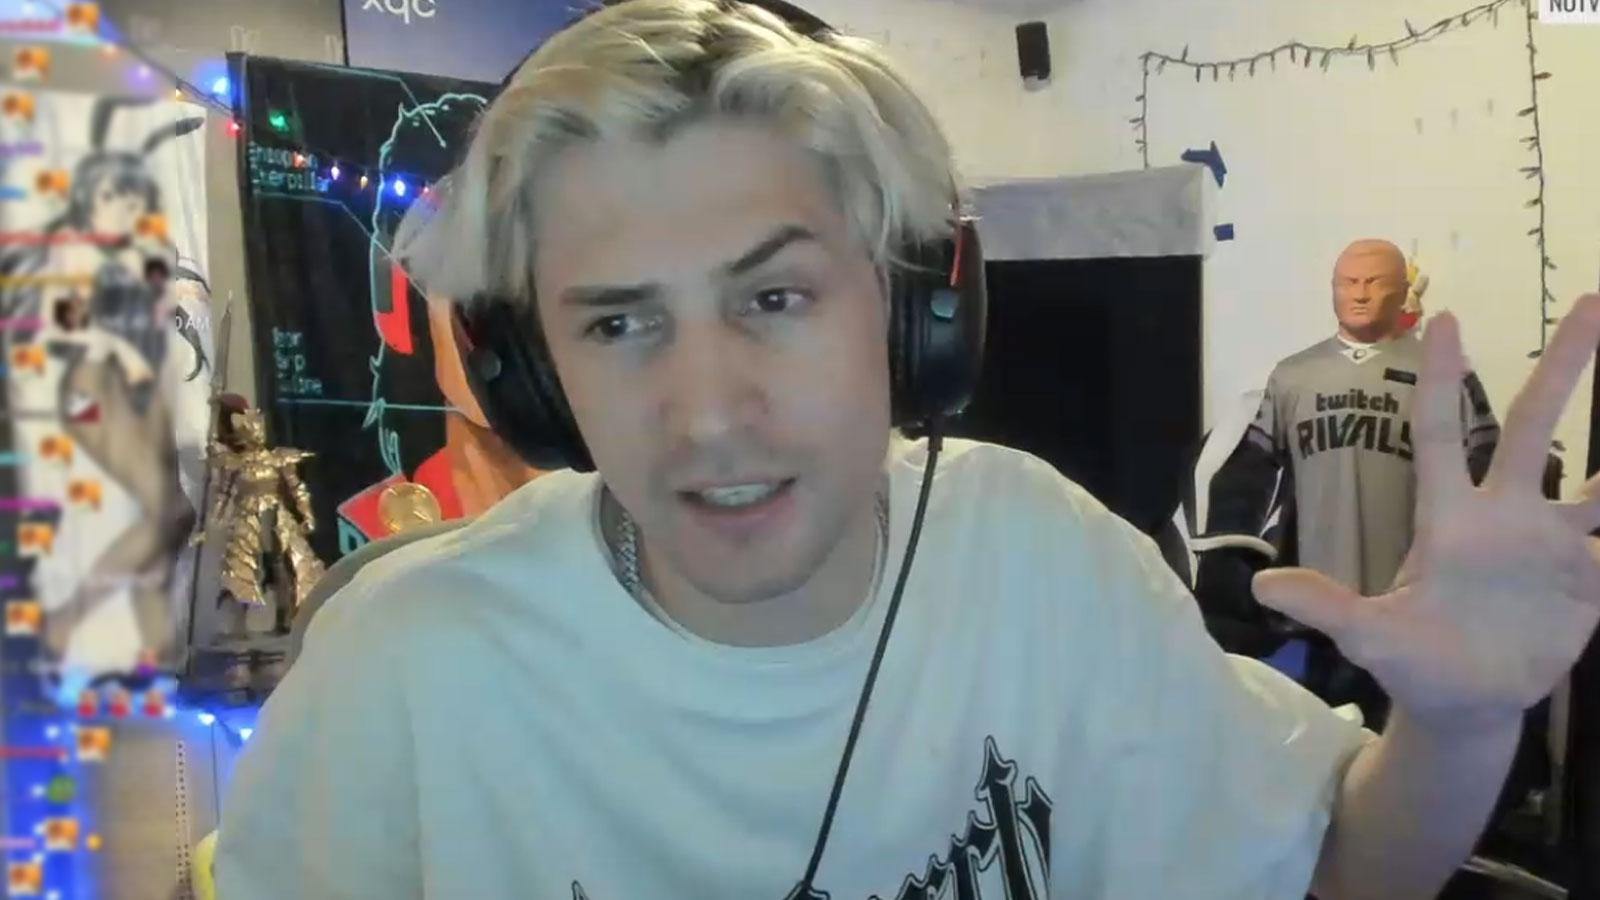 xQc wearing white sweater and gaming headset